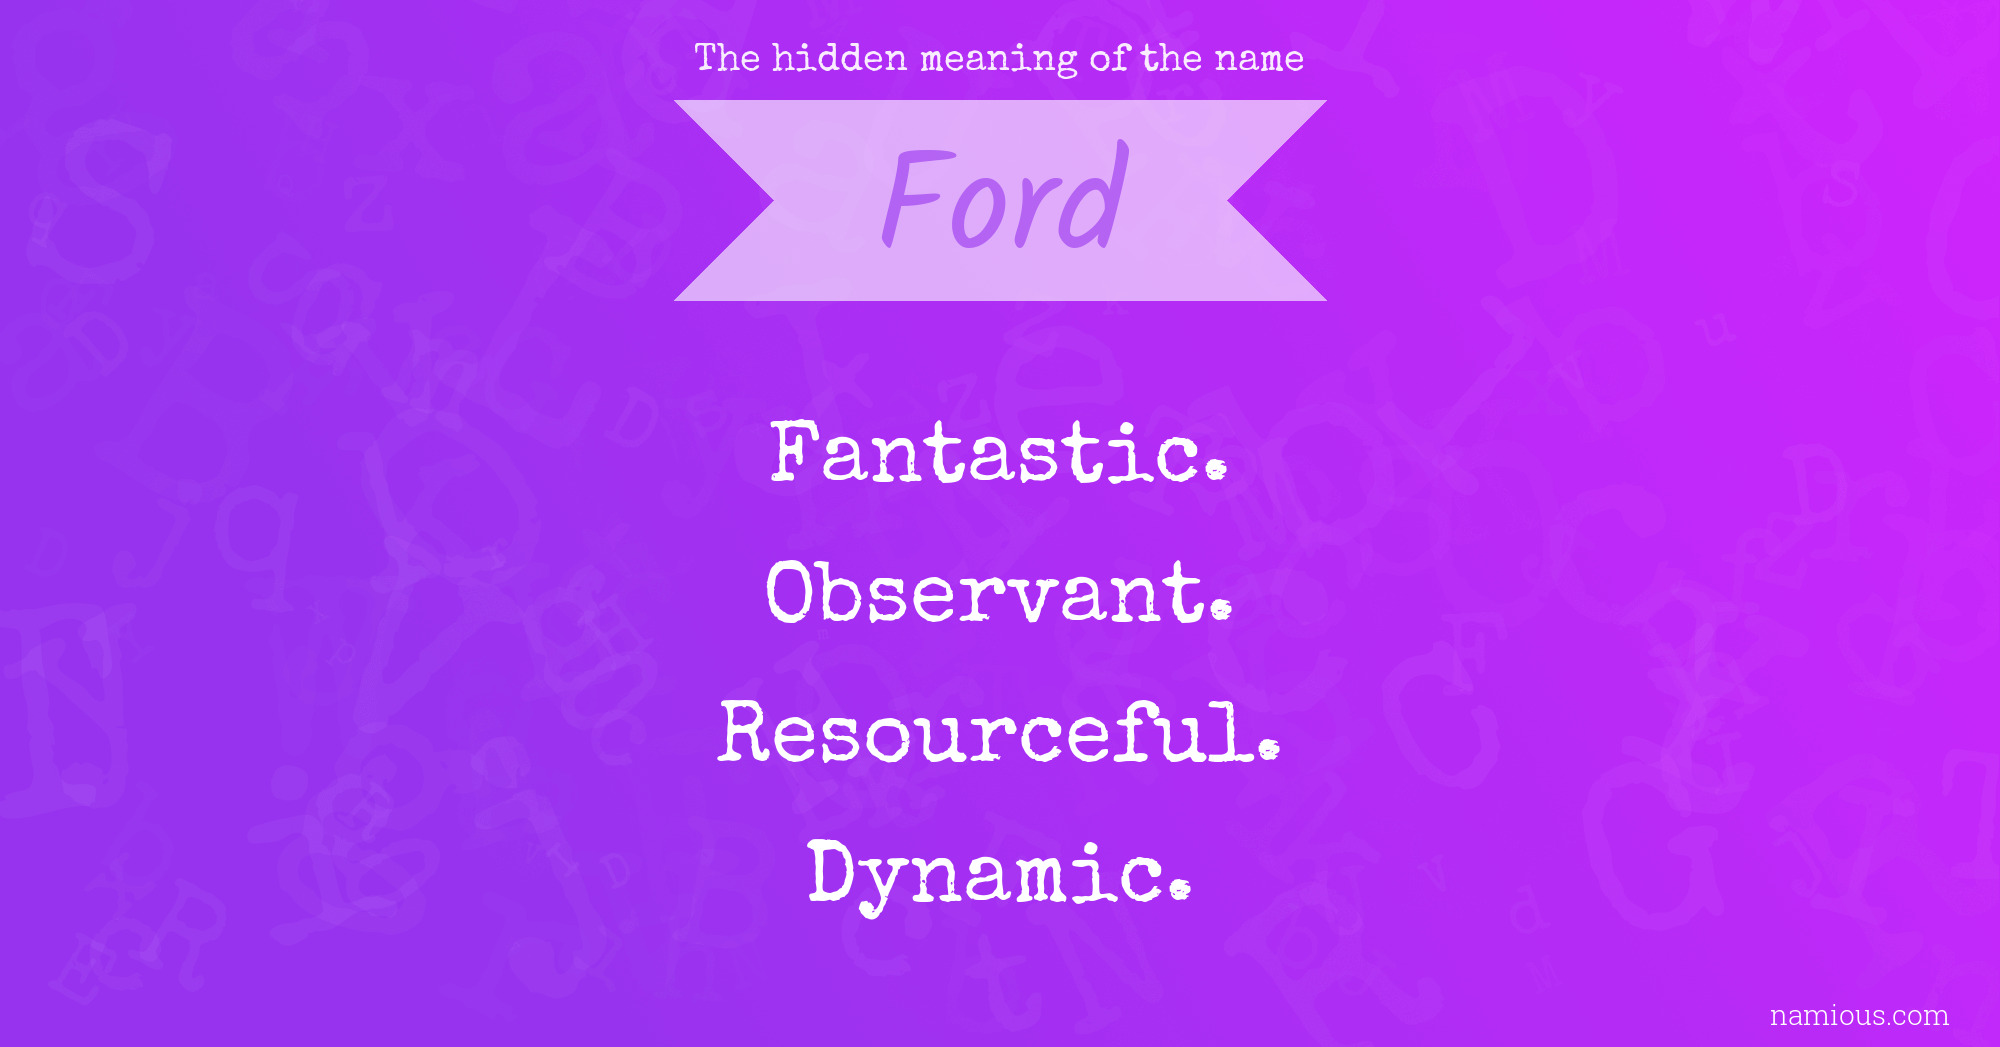 The hidden meaning of the name Ford